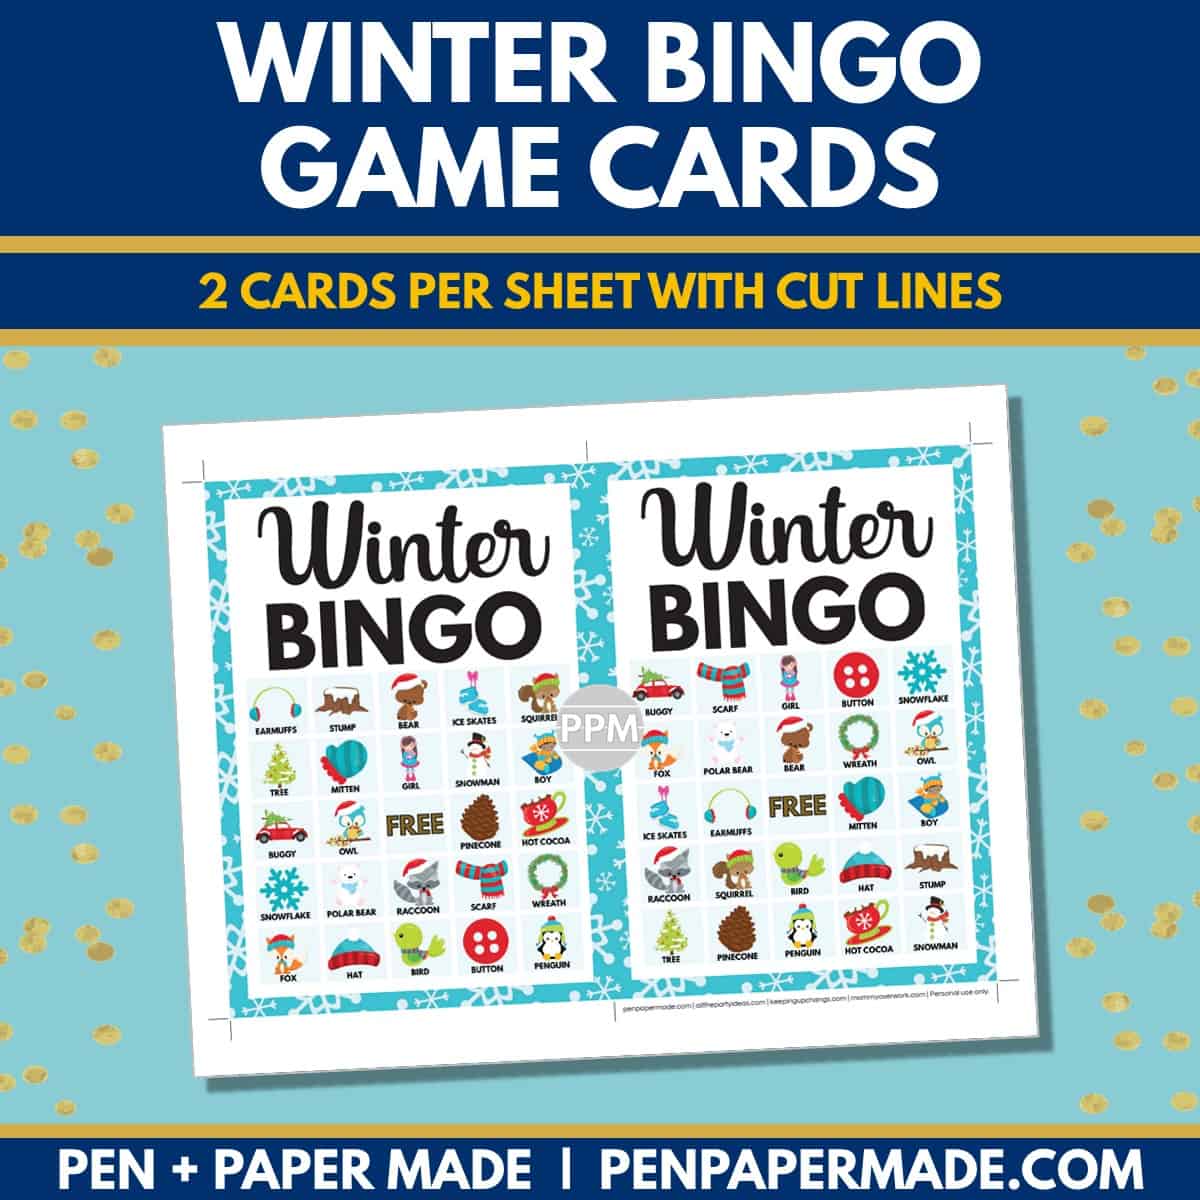 winter bingo card 5x5 5x7 game boards with images and text words.